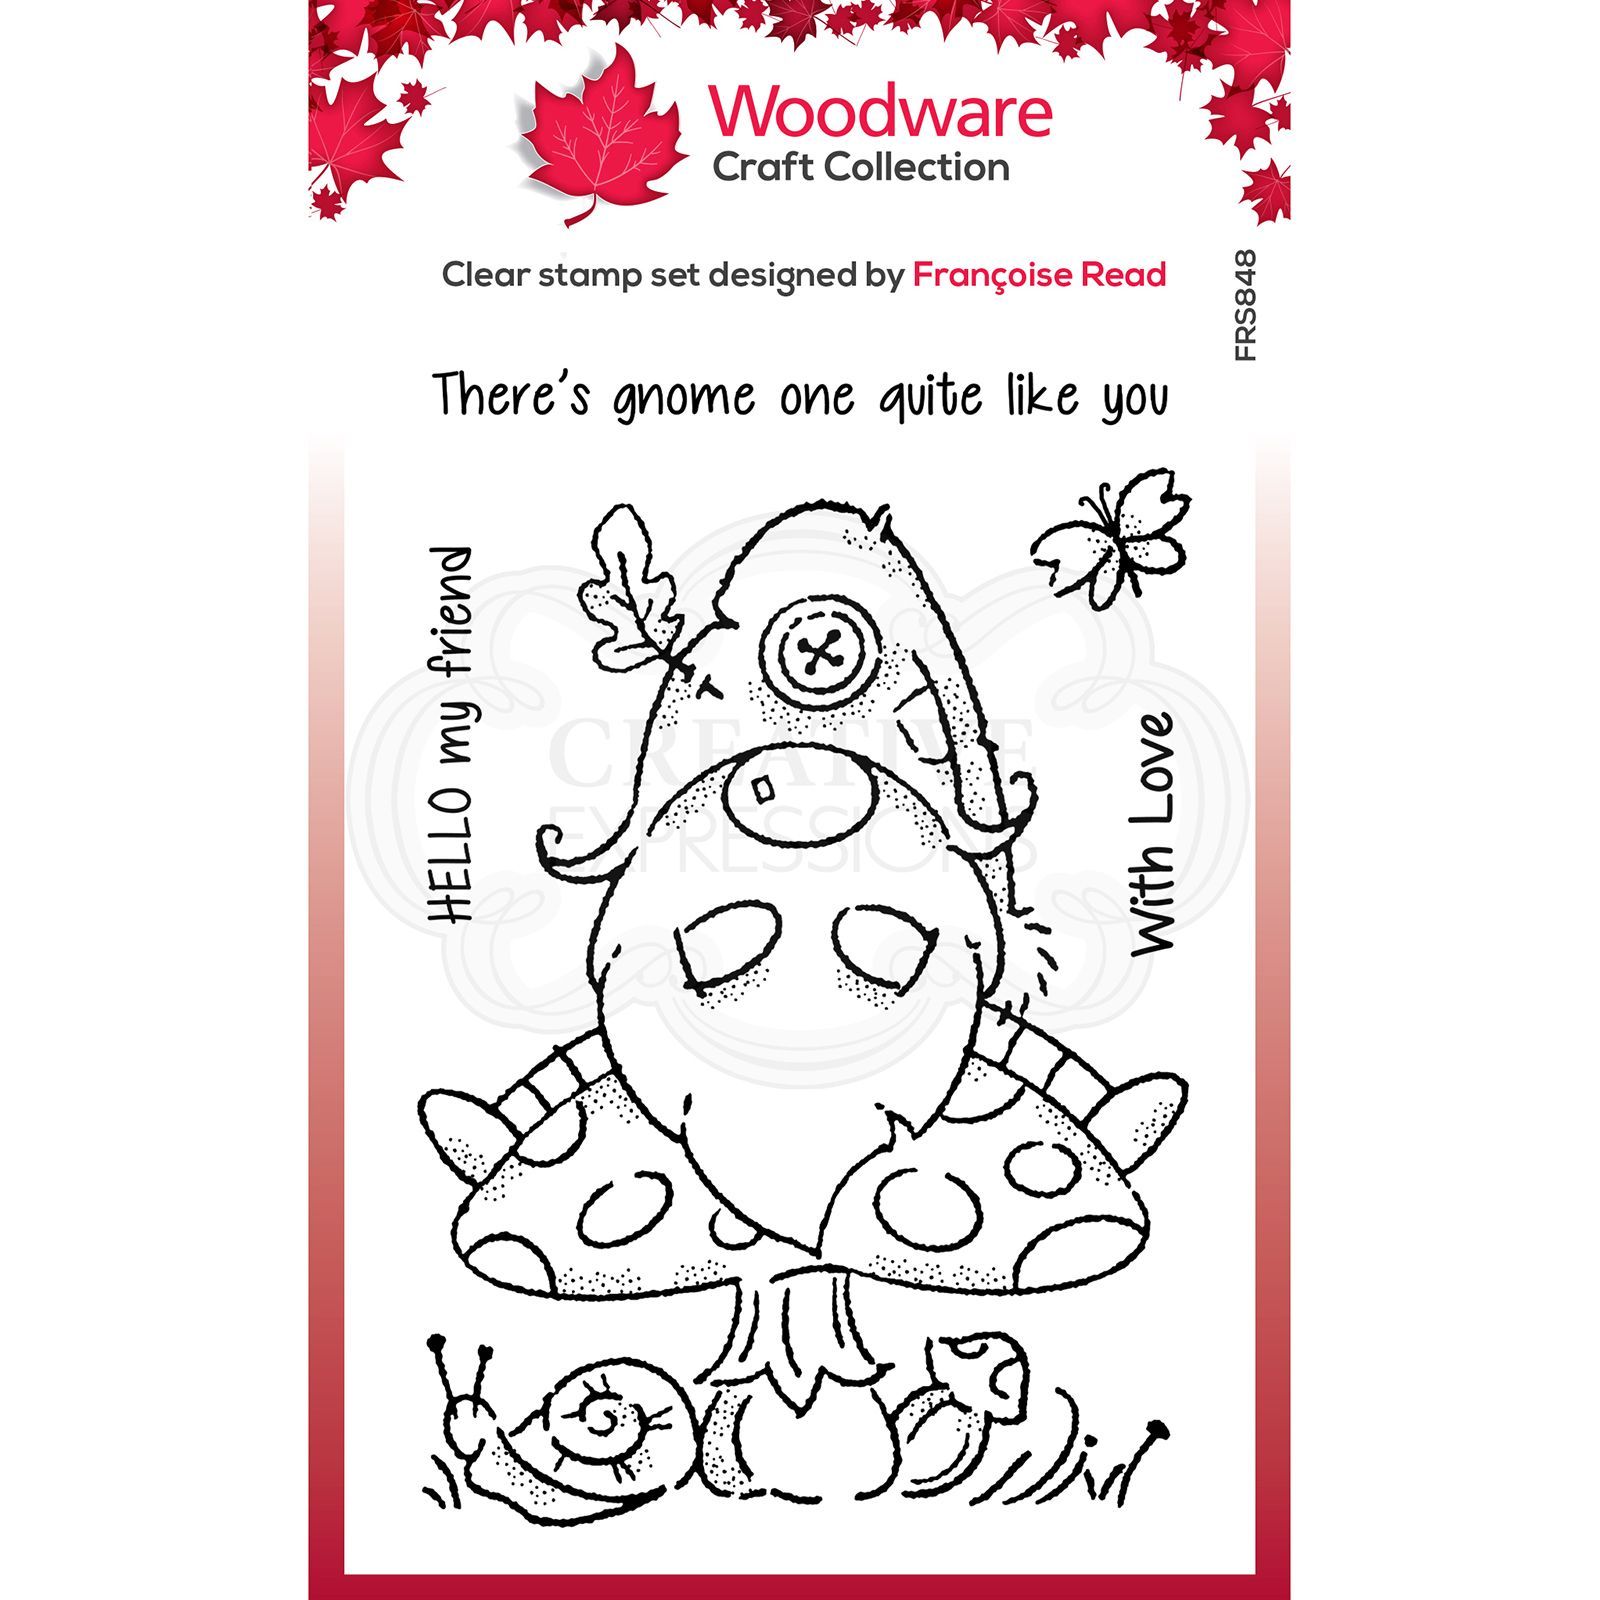 Silikonstempel Wald-Gnom Woodware Craft Collection 10,5x14,5cm